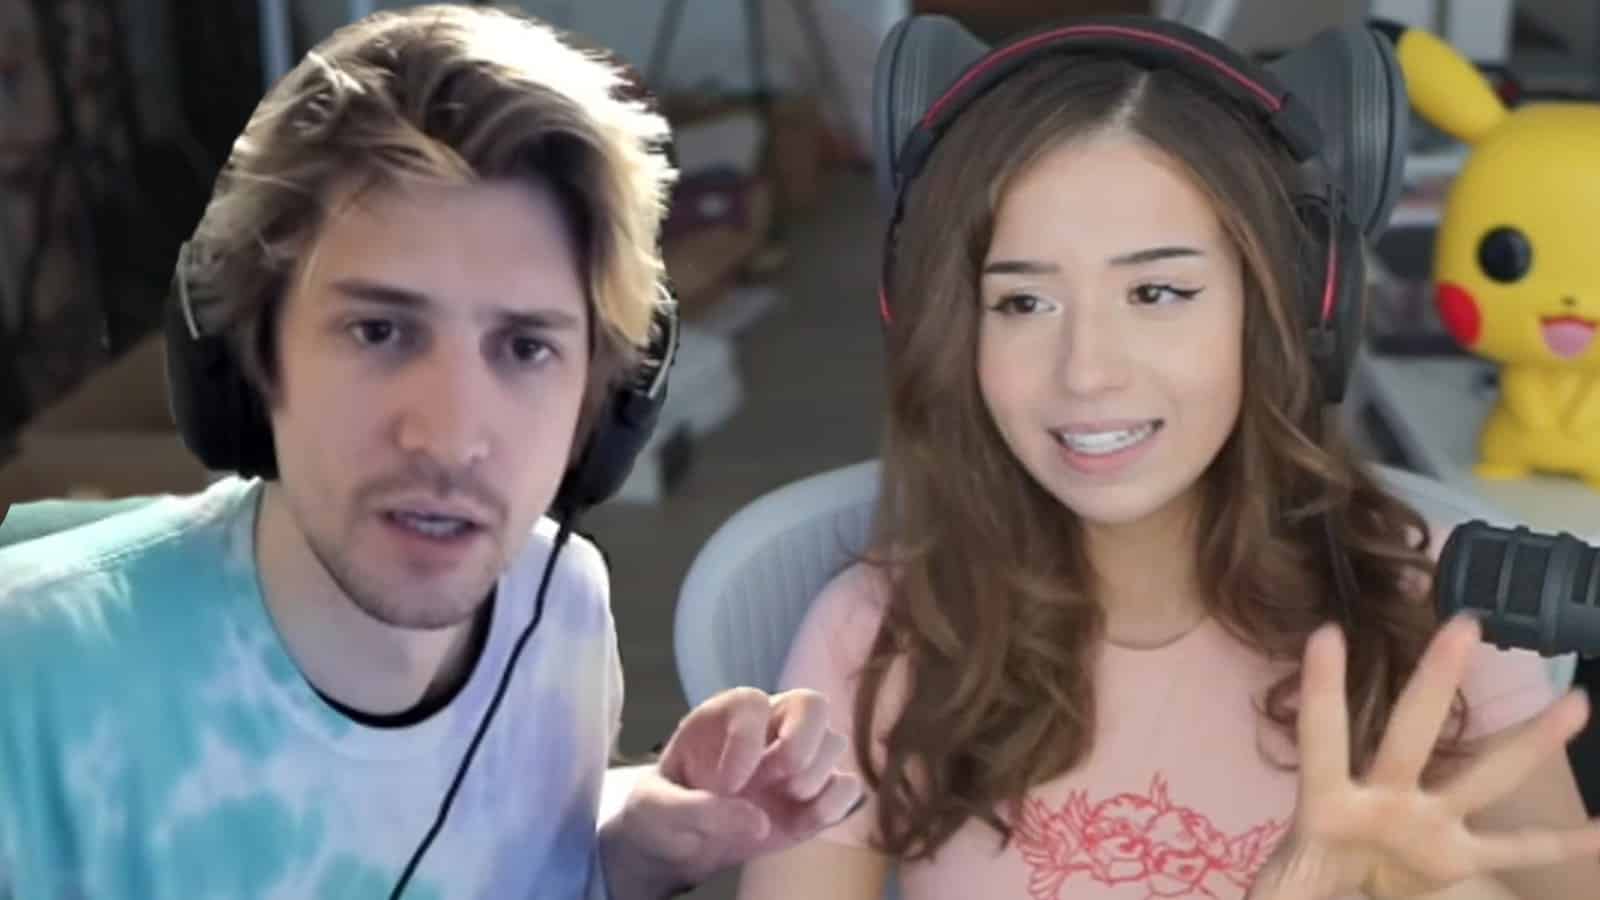 xQc and Pokimane streaming on Twitch